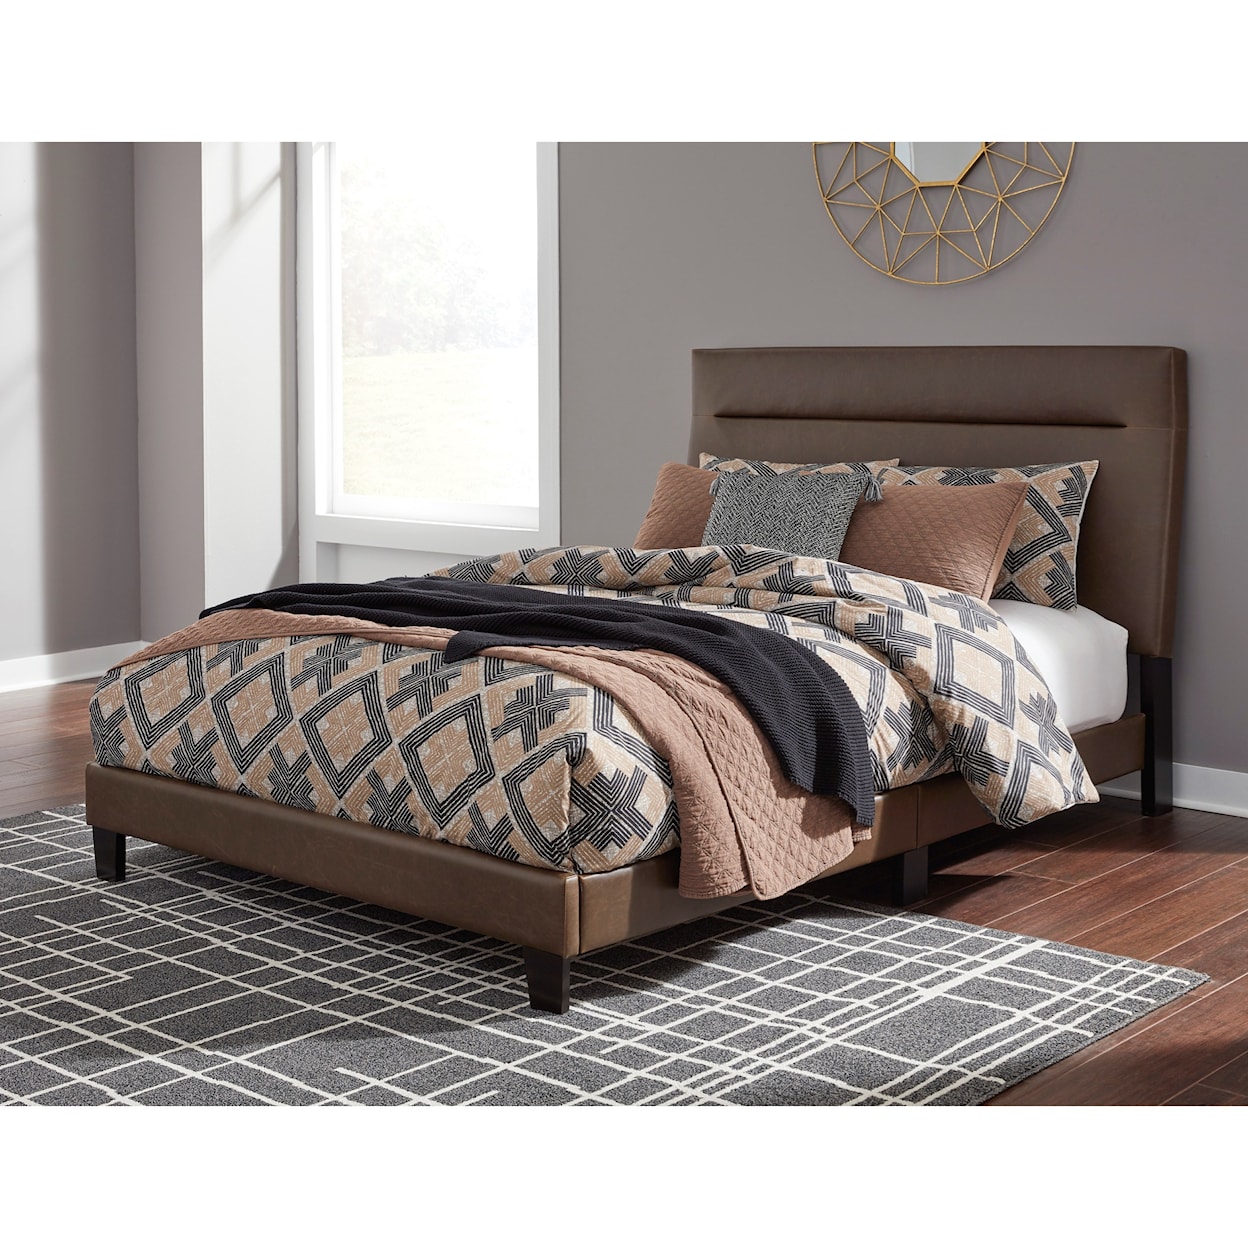 Signature Design Adelloni Queen Upholstered Bed